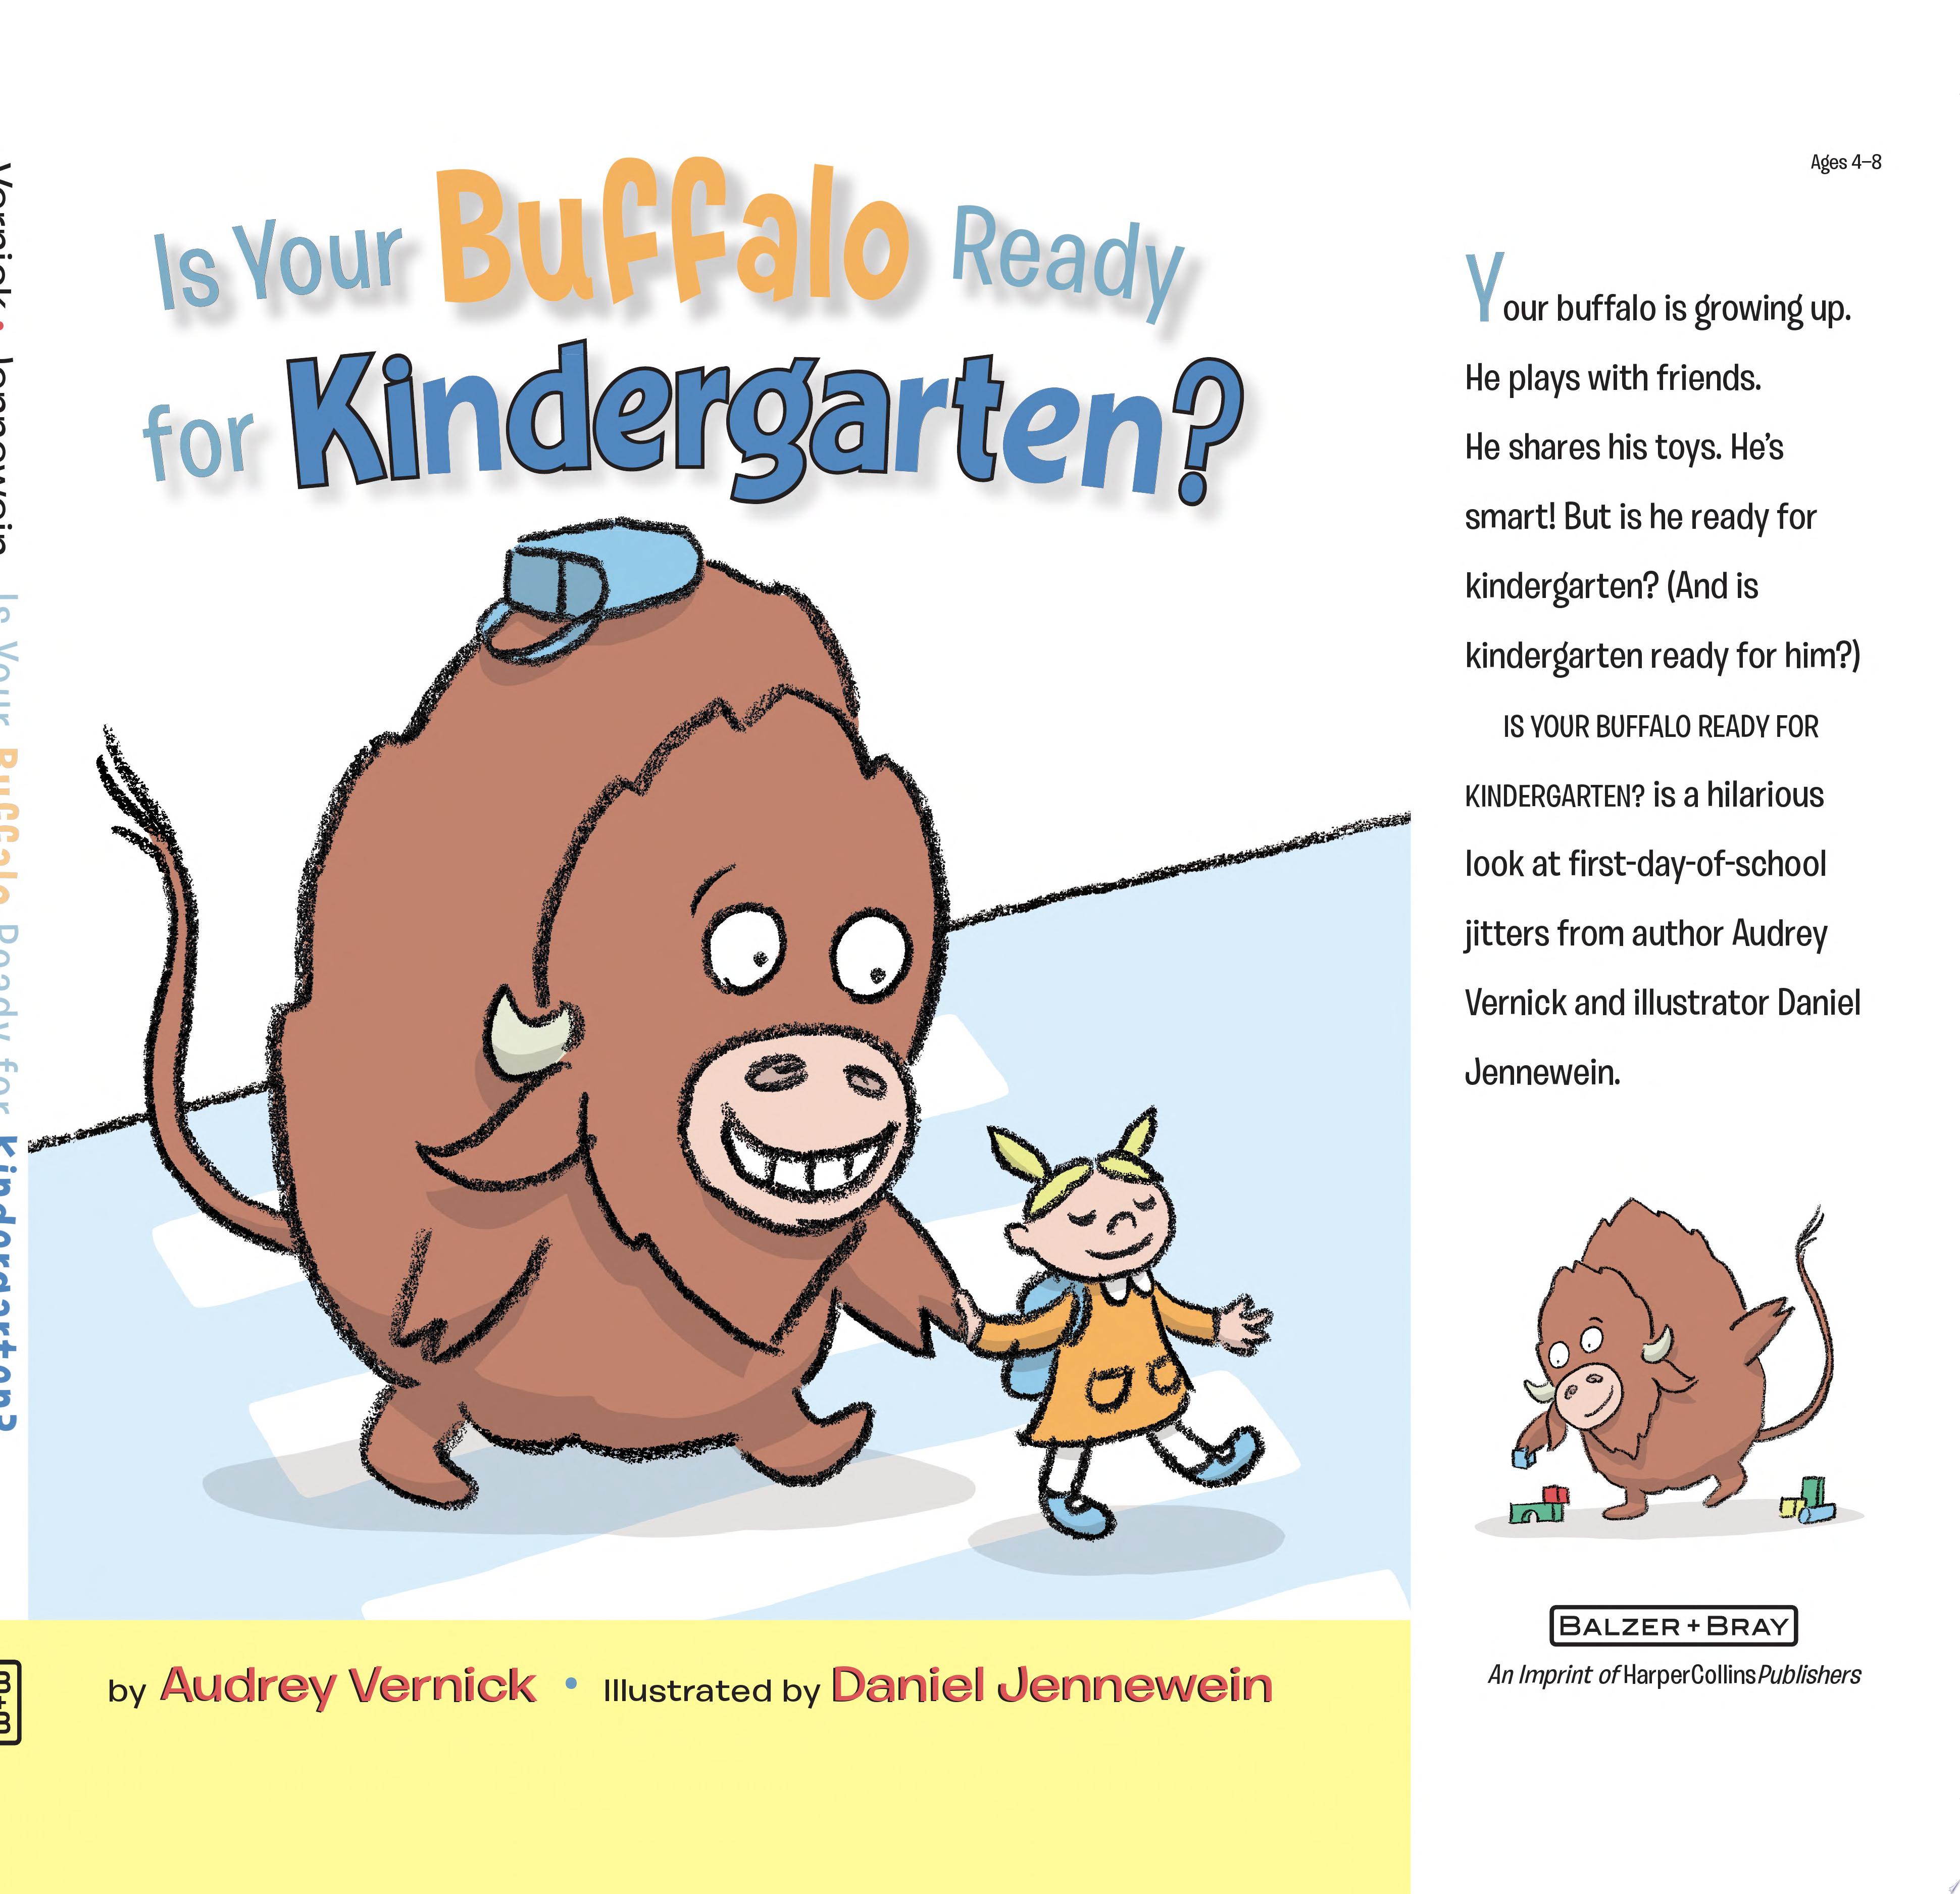 Image for "Is Your Buffalo Ready for Kindergarten?"